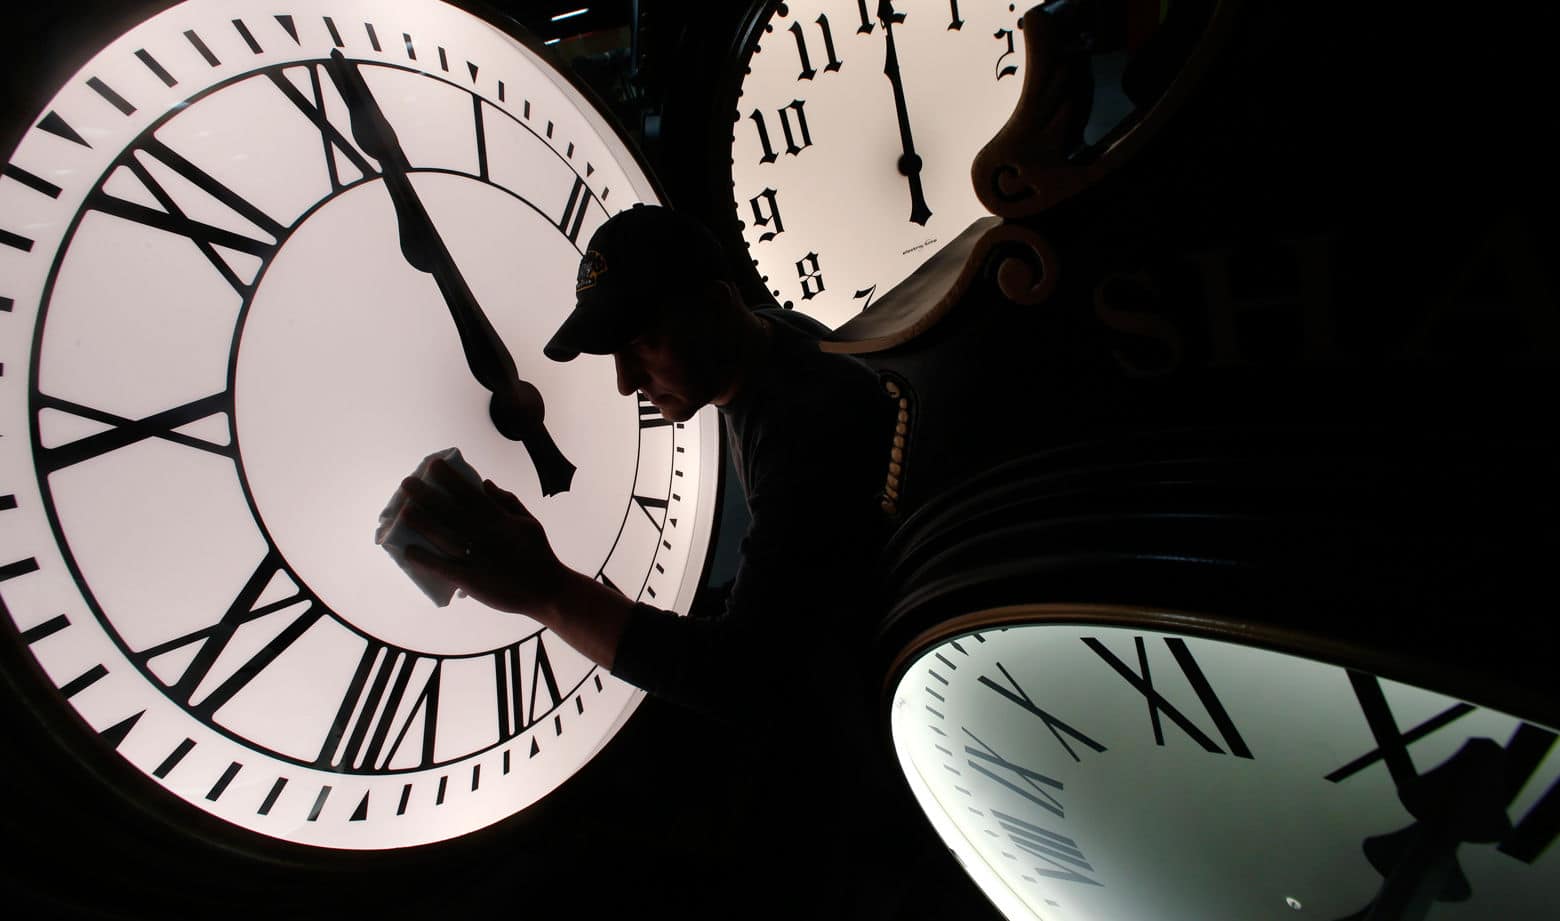 Dave LeMote wipes down a post clock at Electric Time Company, Inc. in Medfield, Mass., Friday, March 7, 2014. Most Americans will set their clocks 60 minutes forward before heading to bed Saturday night, but daylight saving time officially starts Sunday at 2 a.m. local time (0700GMT). (AP Photo/Elise Amendola)